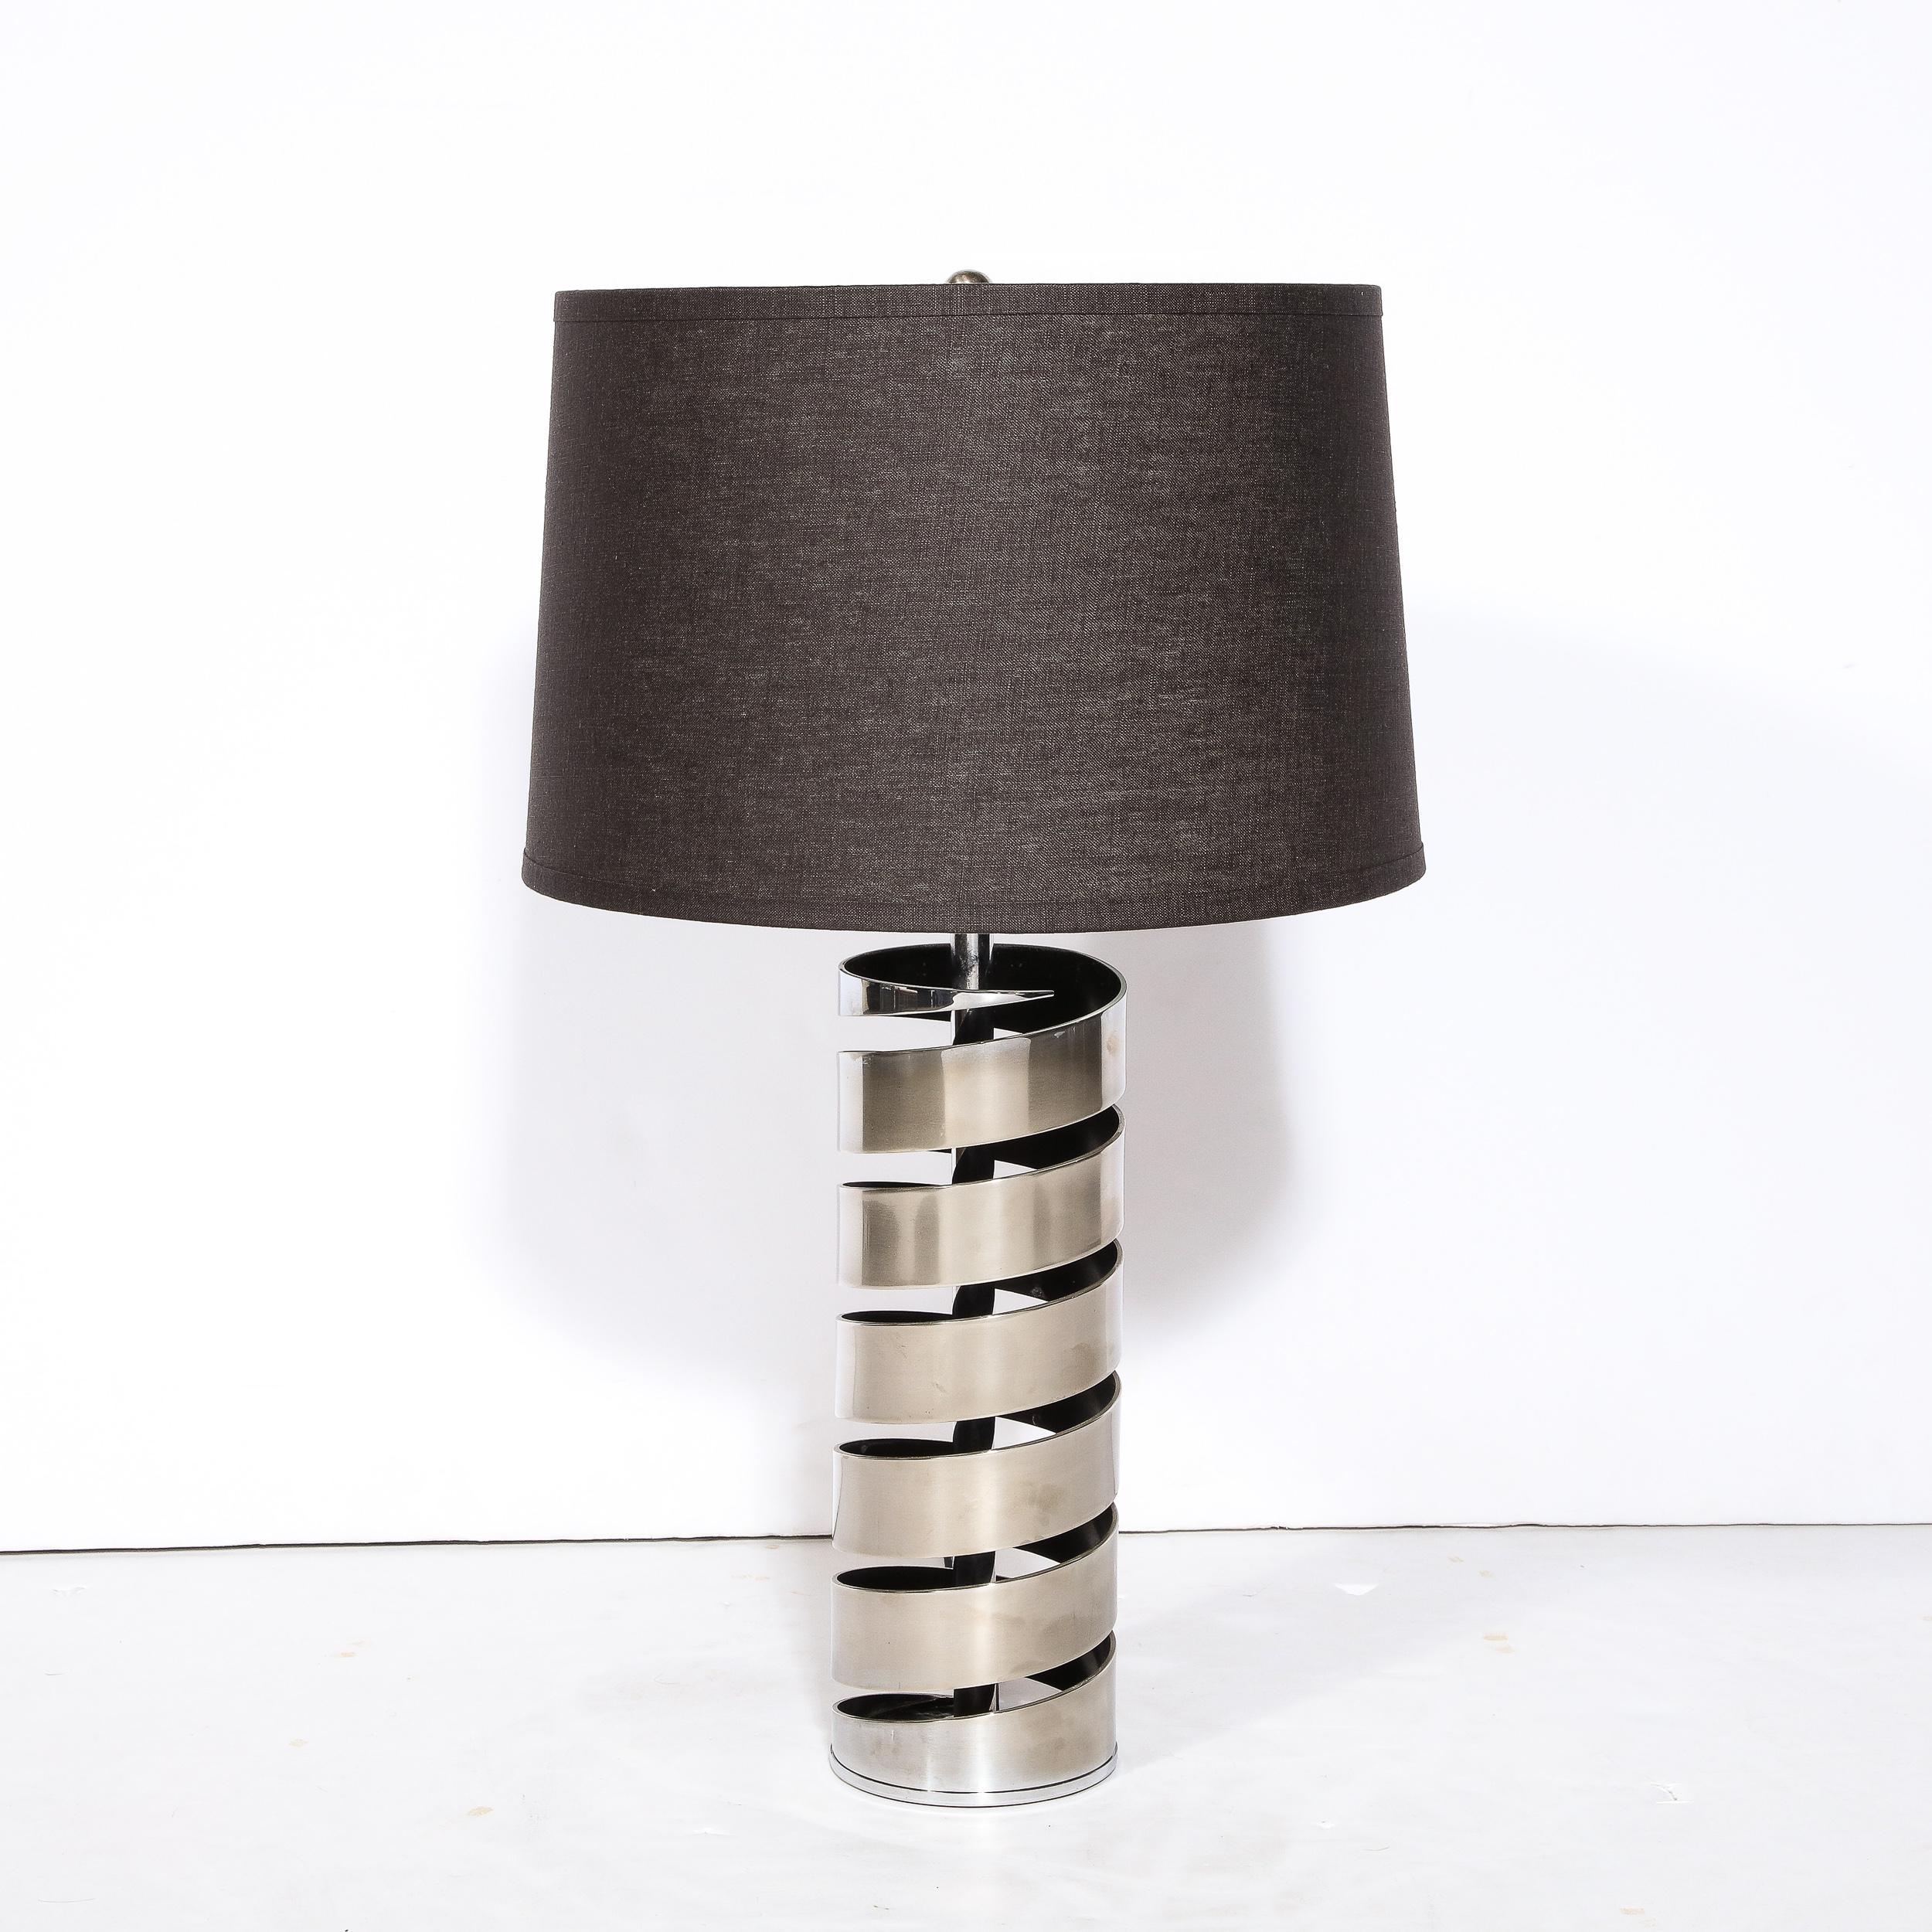 This sophisticated modernist spiral form table lamp was realized in the United States during the latter half of the 20th century. It features a torqued spiral form executed in satin nickel with a hollow body. The negative space created by the